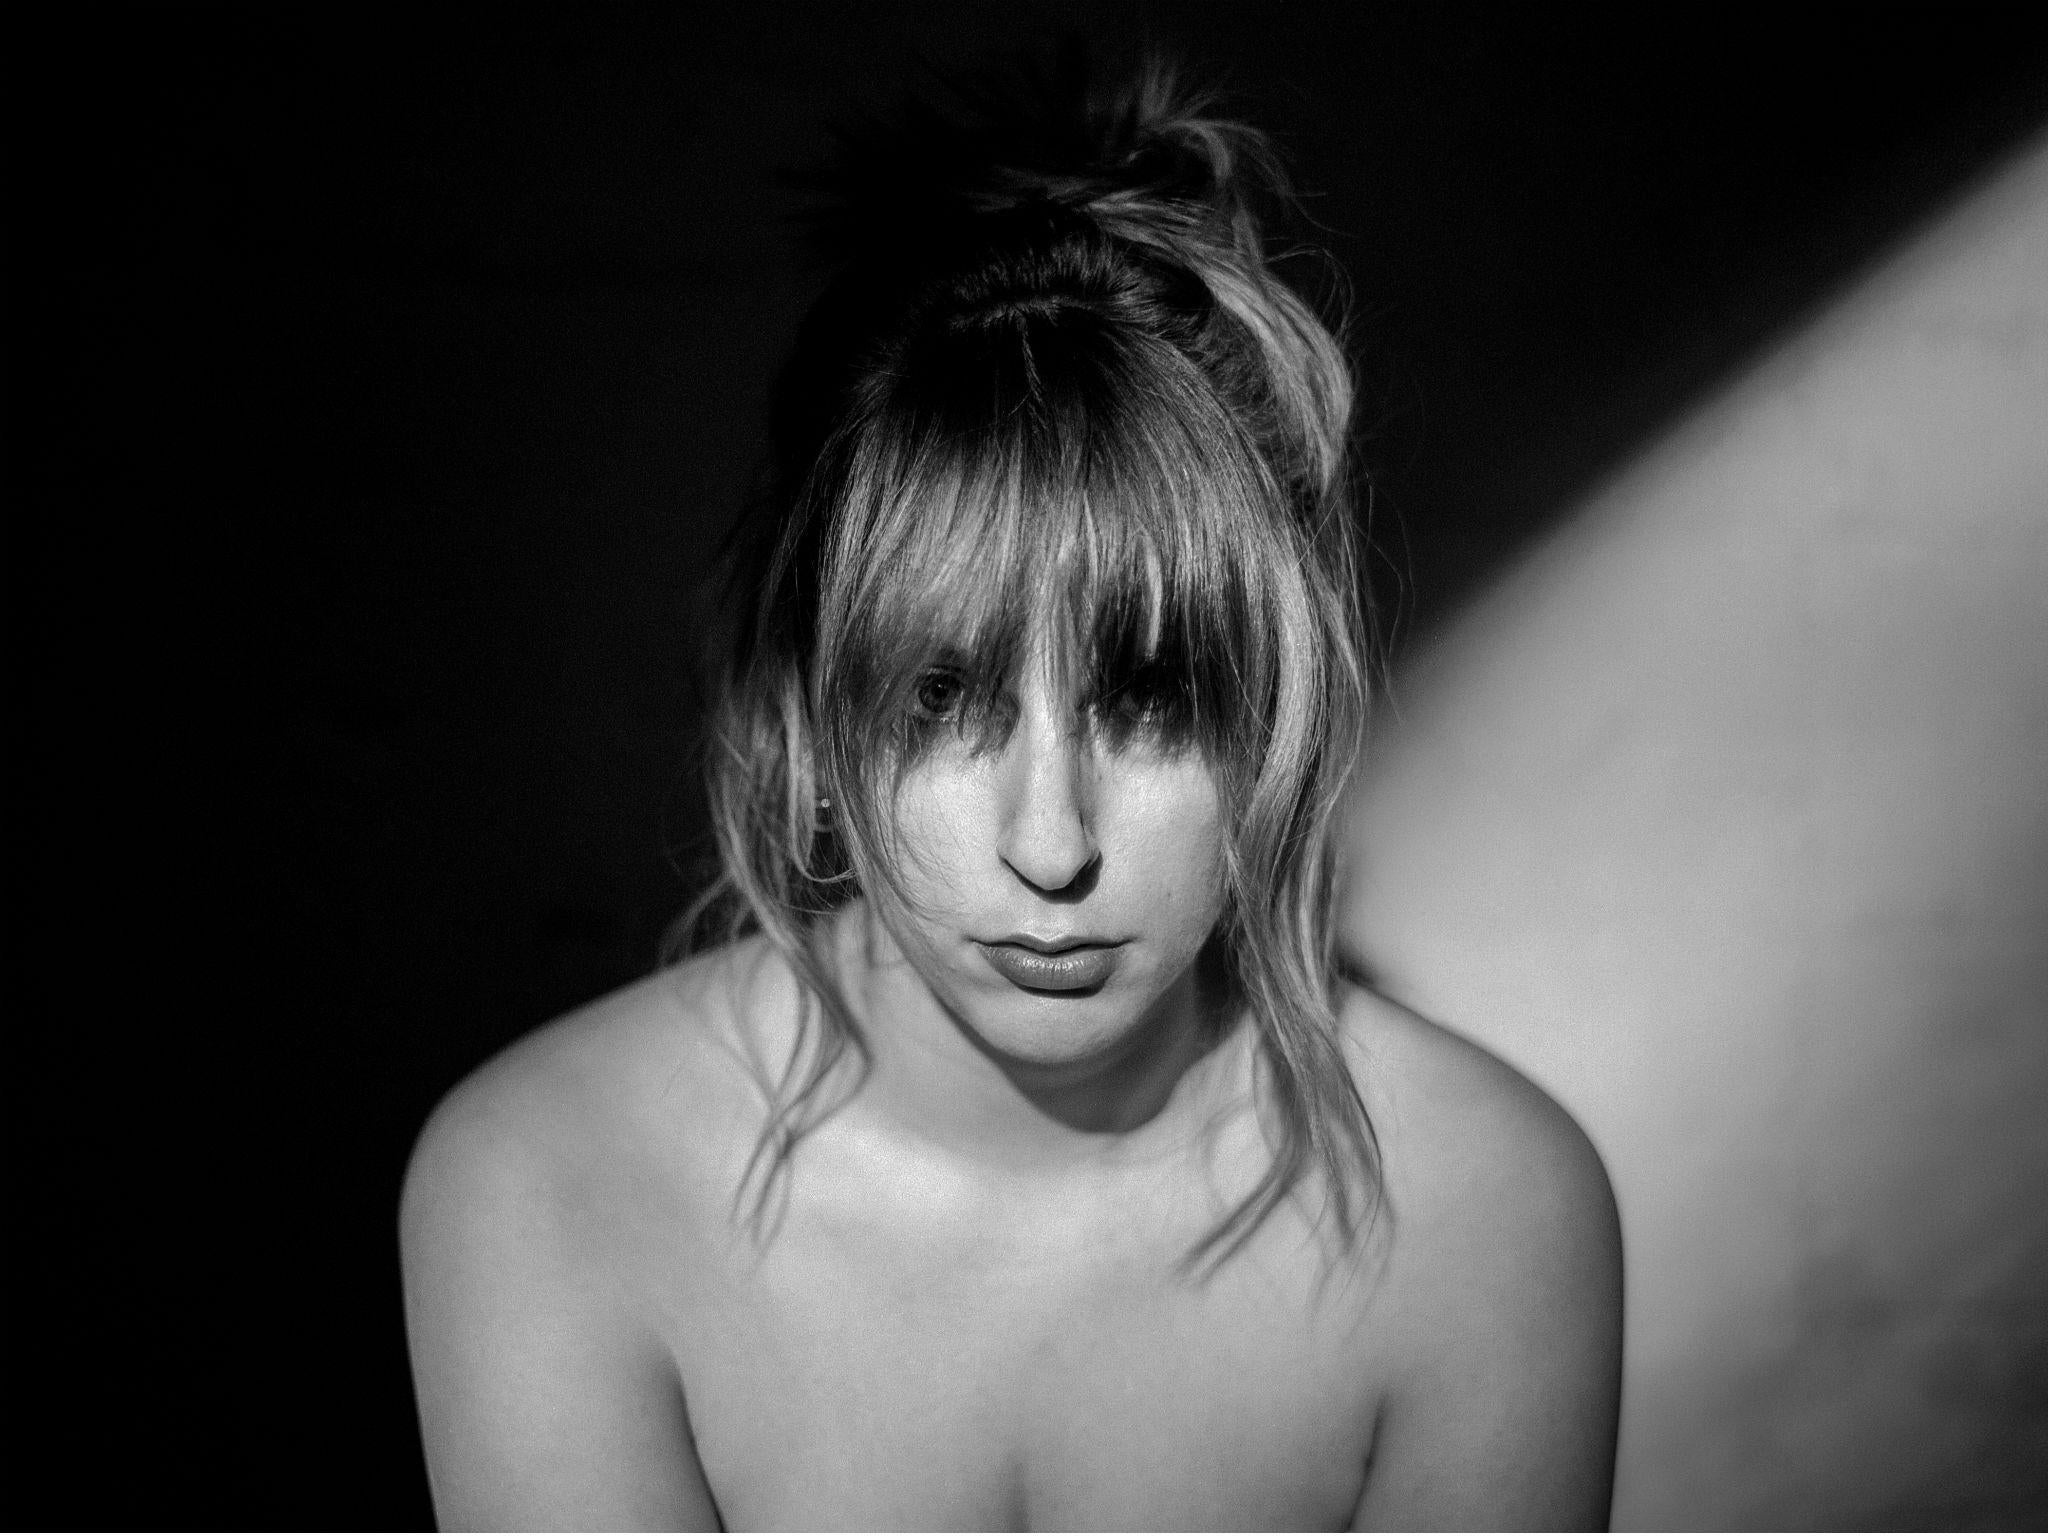 Susanne Sundfør is releasing her sixth studio album 'Music For People In Trouble' on Bella Union